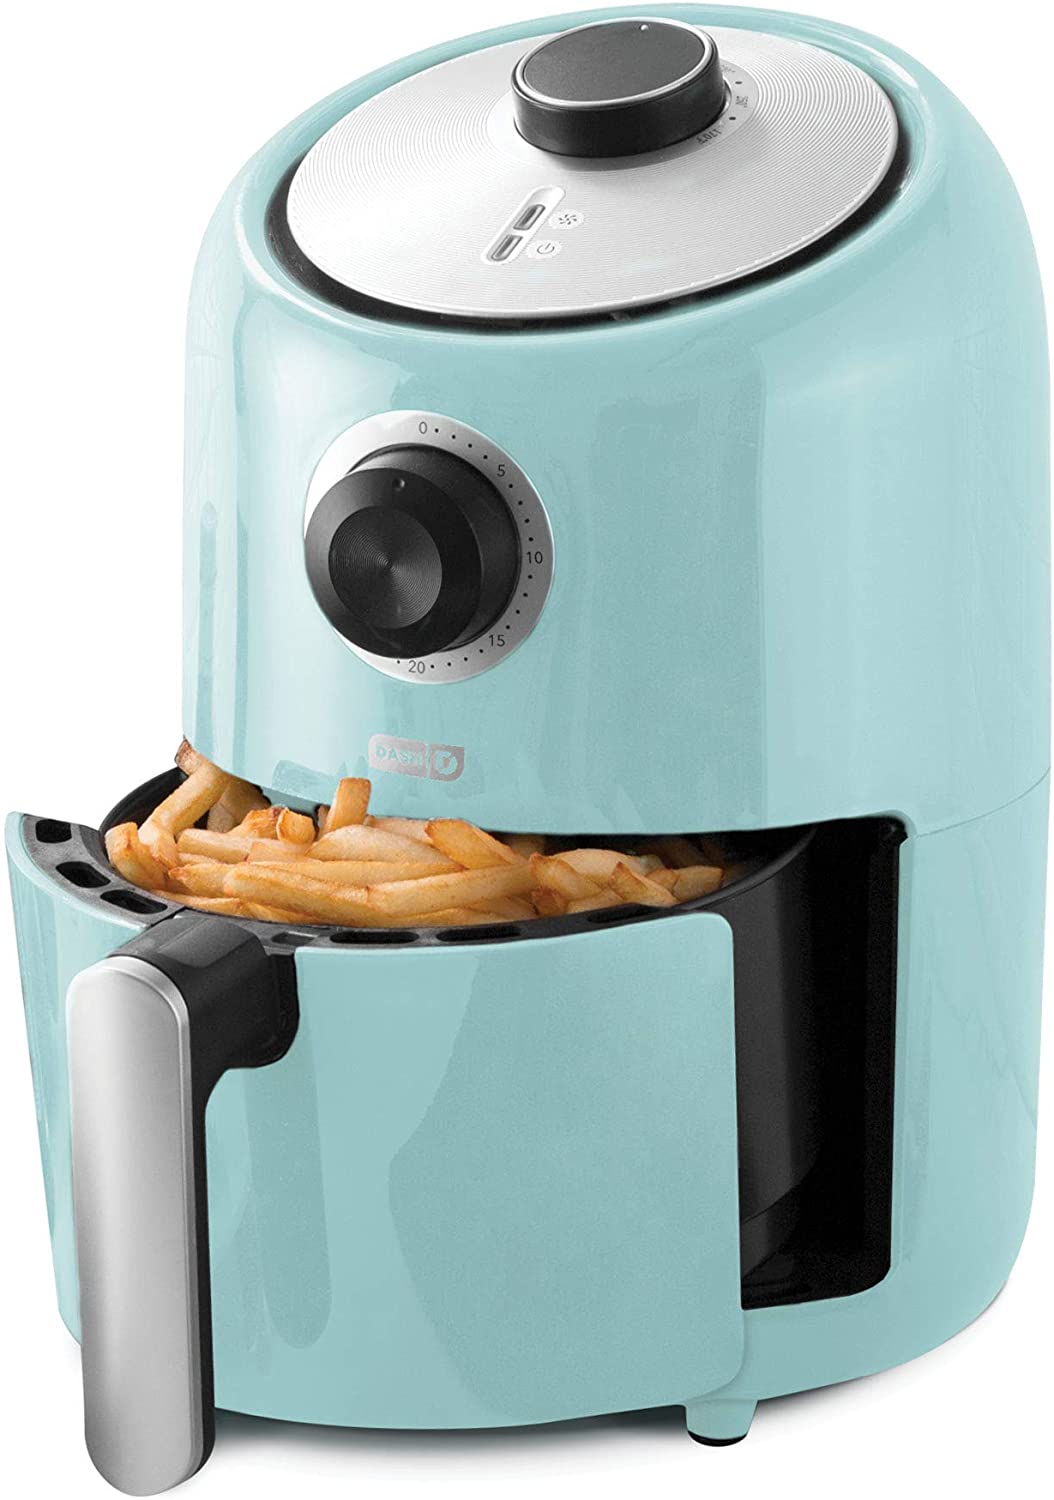 Image of Compact Air Fryer Oven Cooker